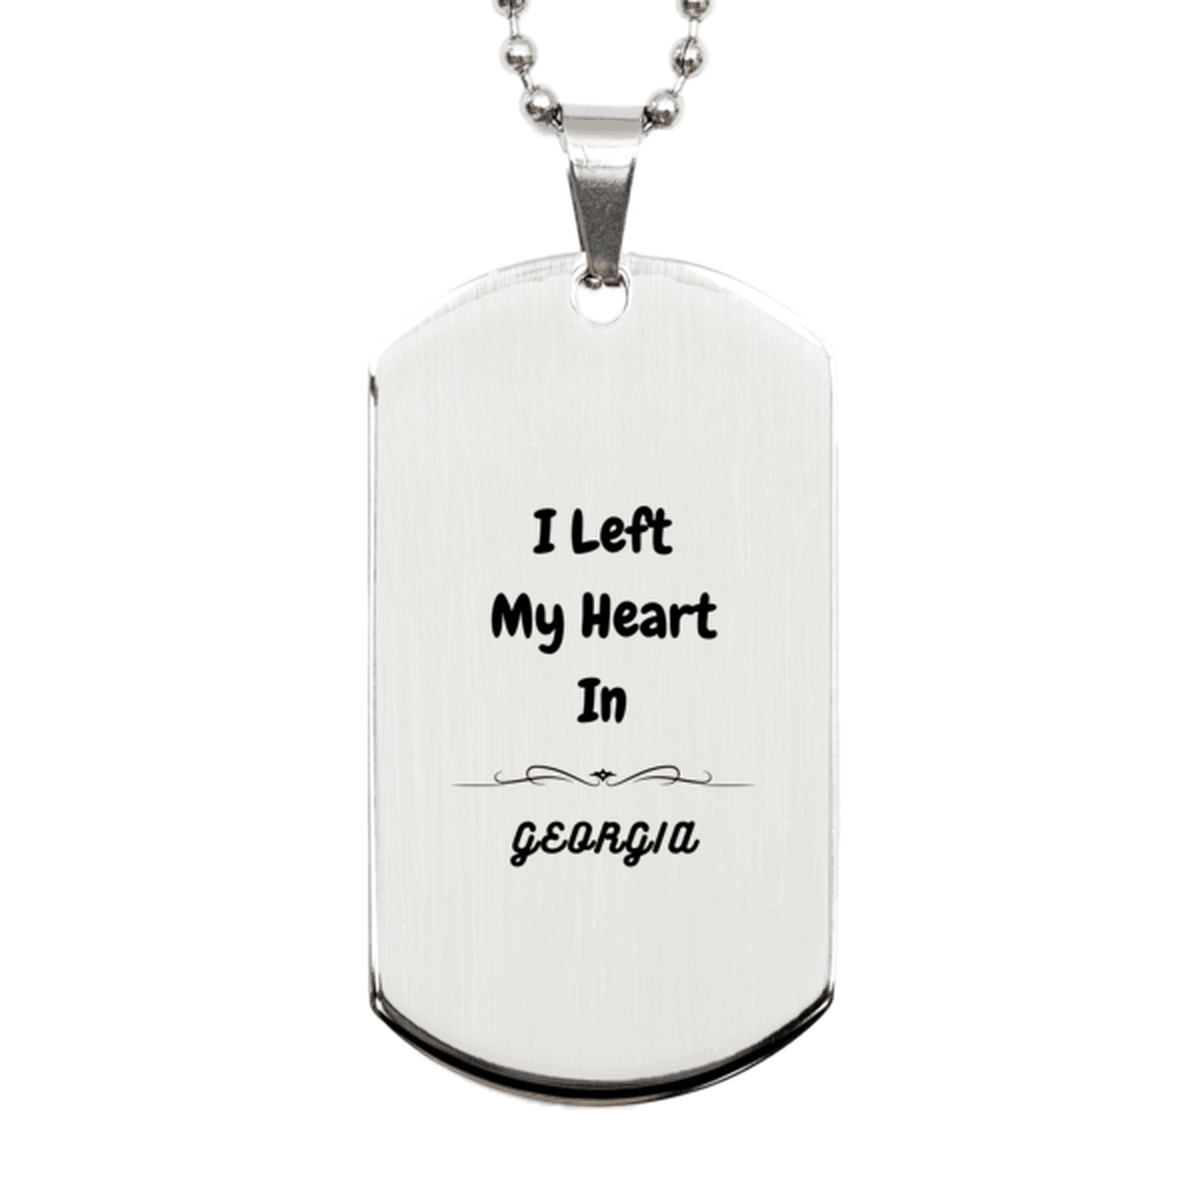 I Left My Heart In Georgia Gifts, Meaningful Georgia State for Friends, Men, Women. Silver Dog Tag for Georgia People - Mallard Moon Gift Shop